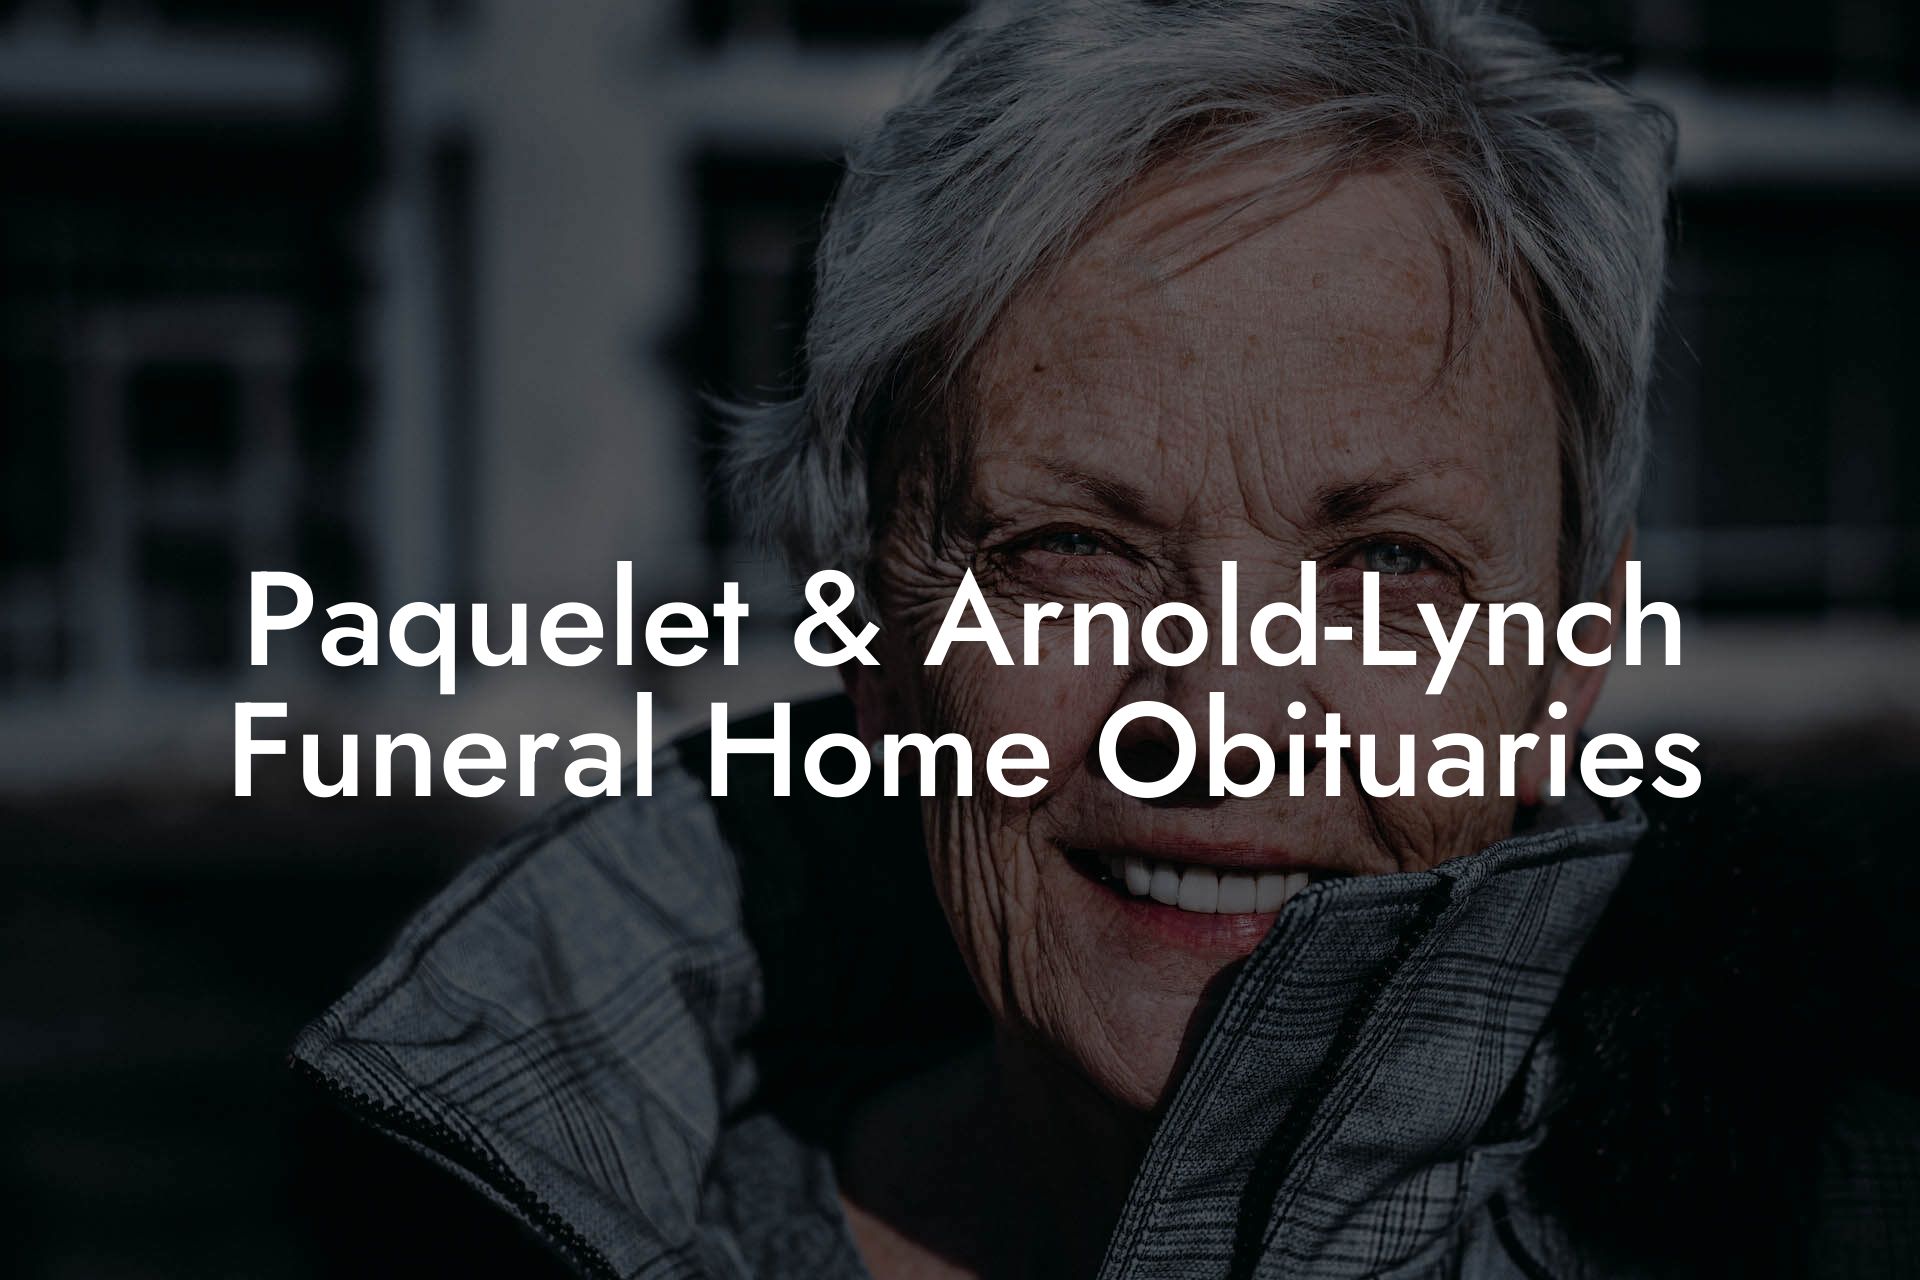 Paquelet & Arnold-Lynch Funeral Home Obituaries